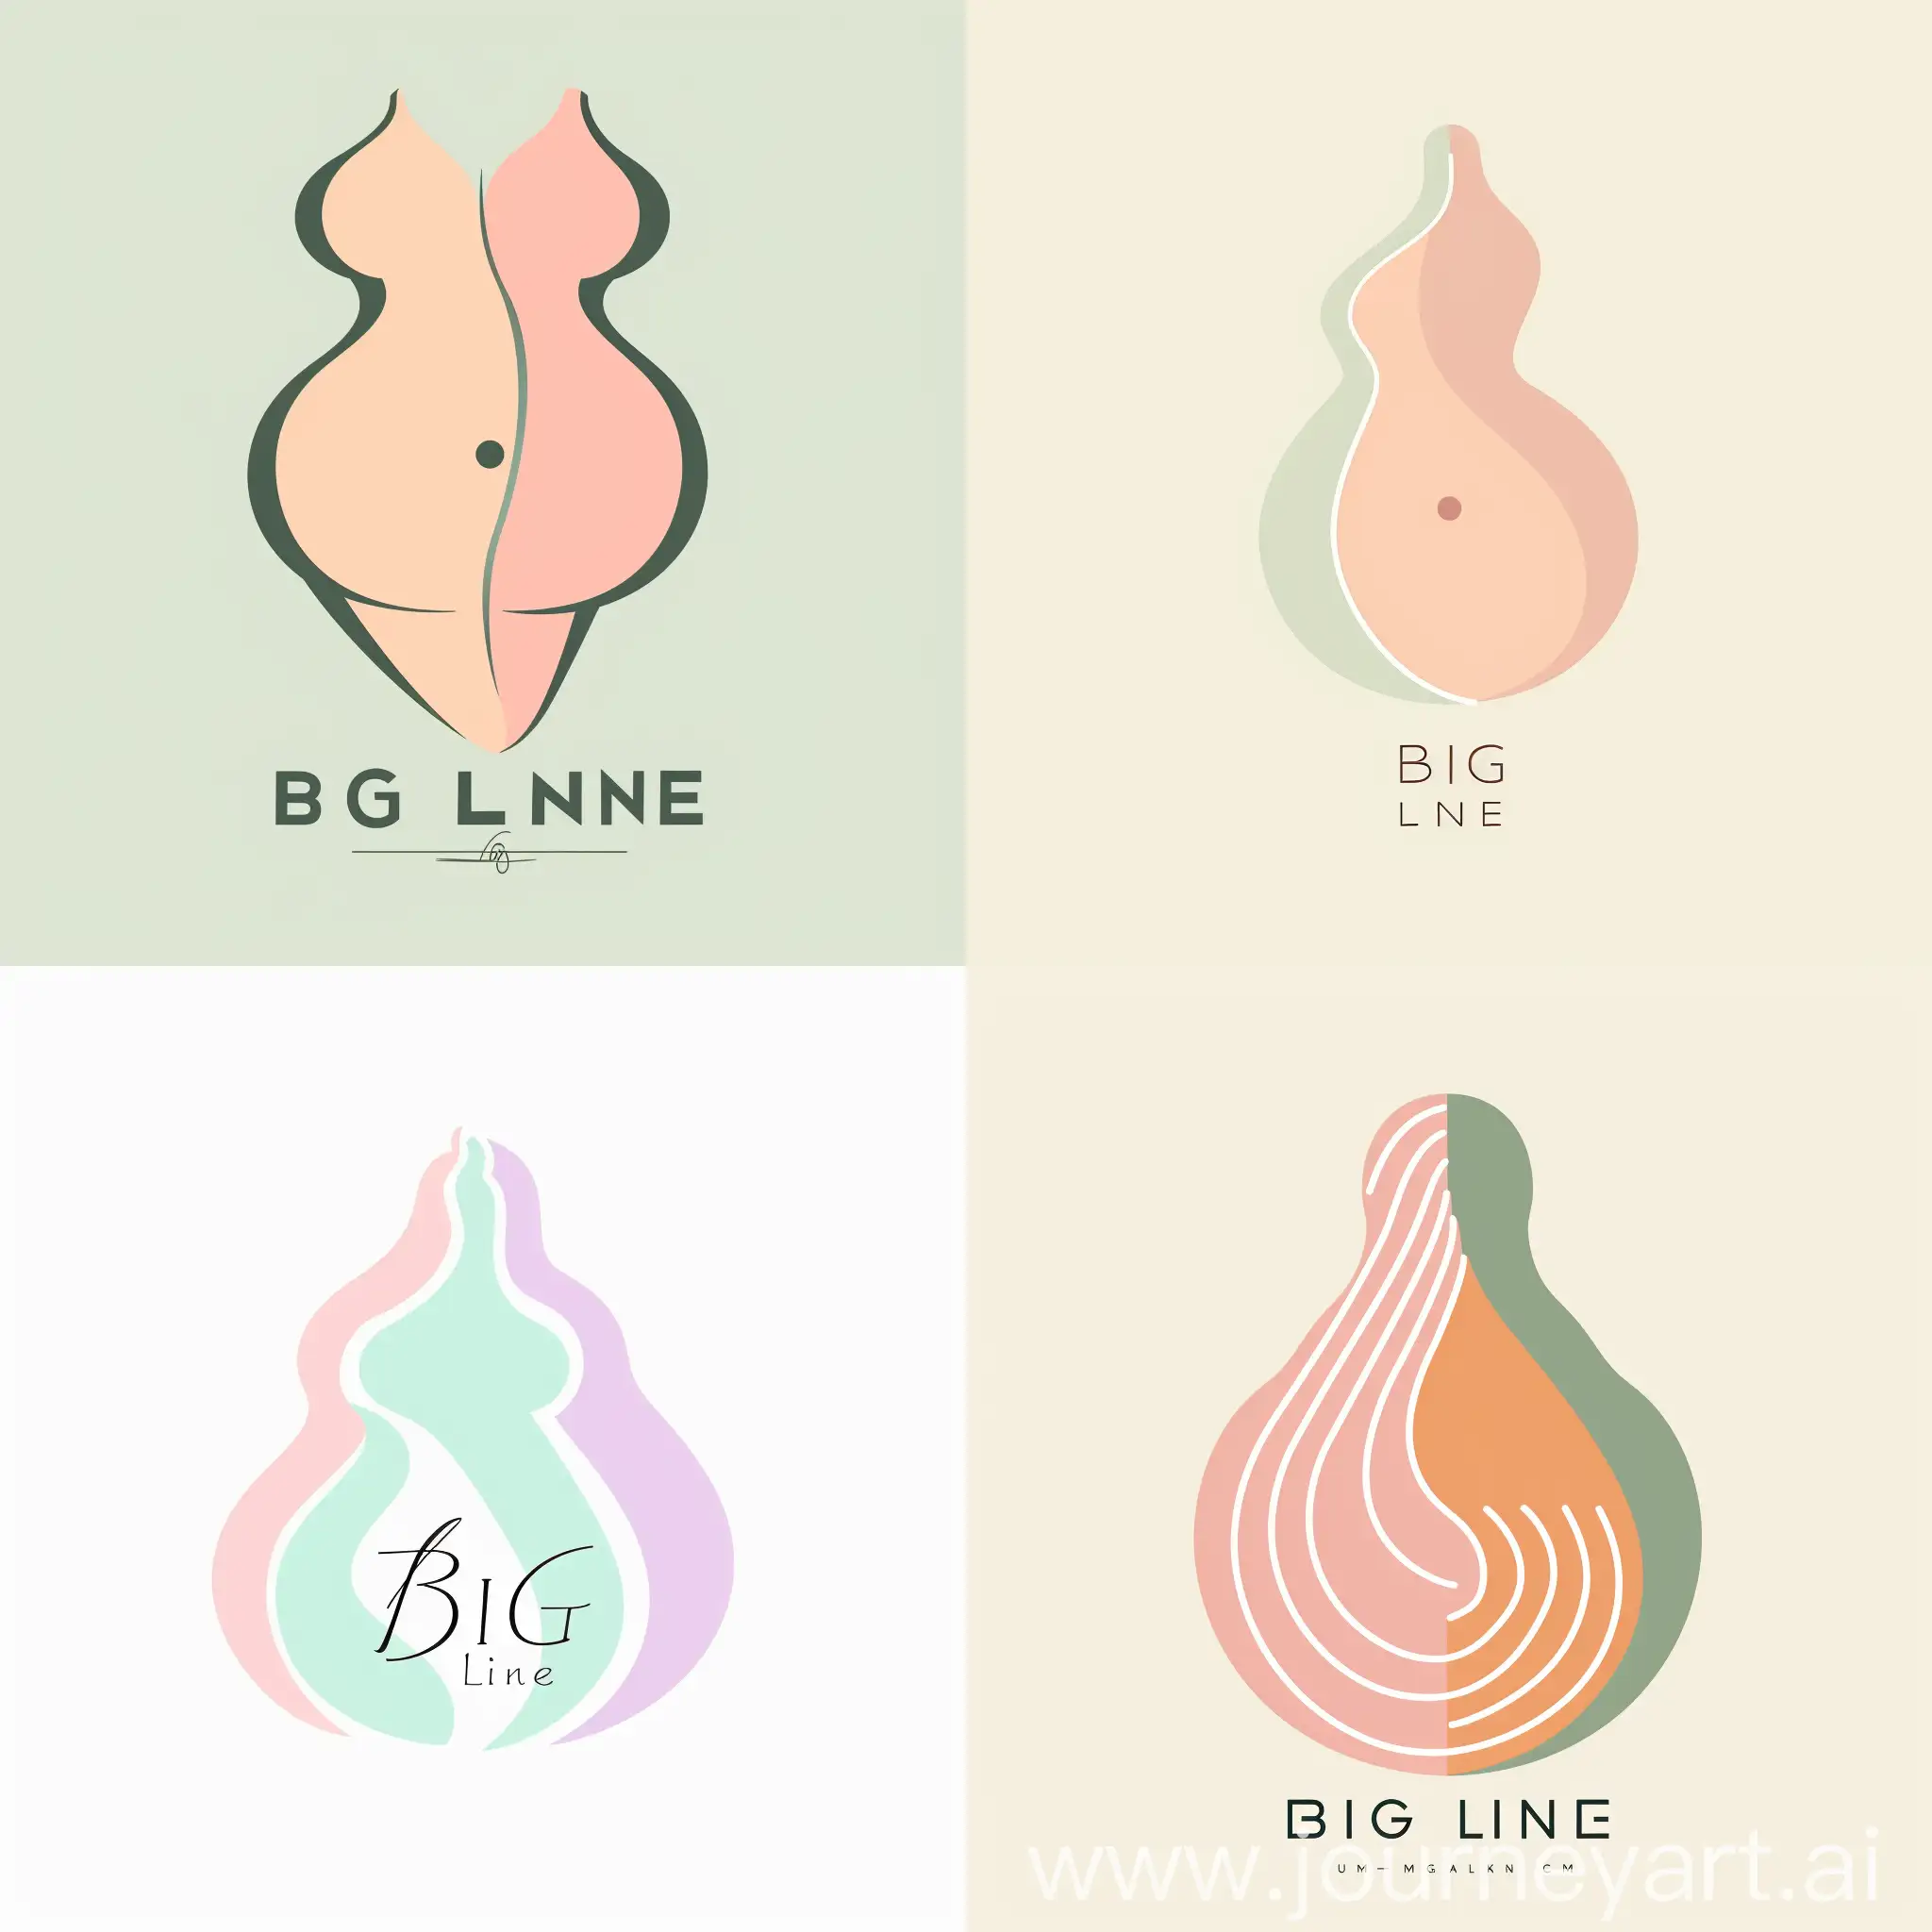 Design a logo for women's clothing for overweight people, take the silhouette / lines of a curvy body as the basis for the logo. The brand name is a "Big line". You need to come up with an association with the brand name. Display the brand name in the logo. Use pastel colors.